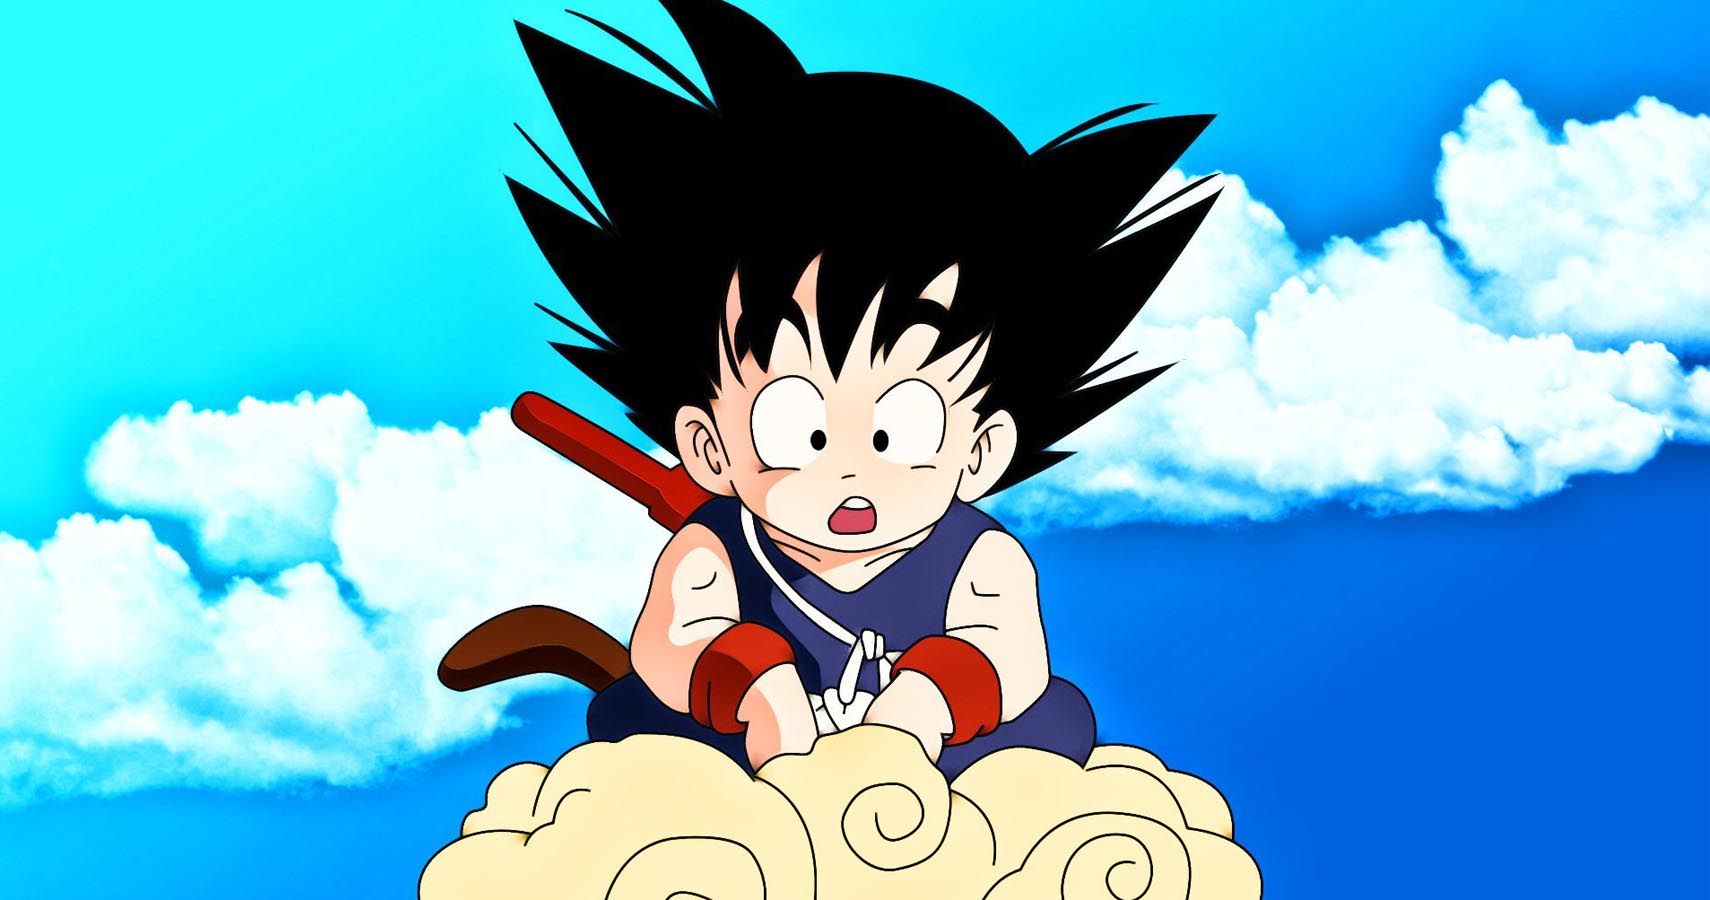 Dragon ball is low key my childhood. Here's my favorite wallpaper